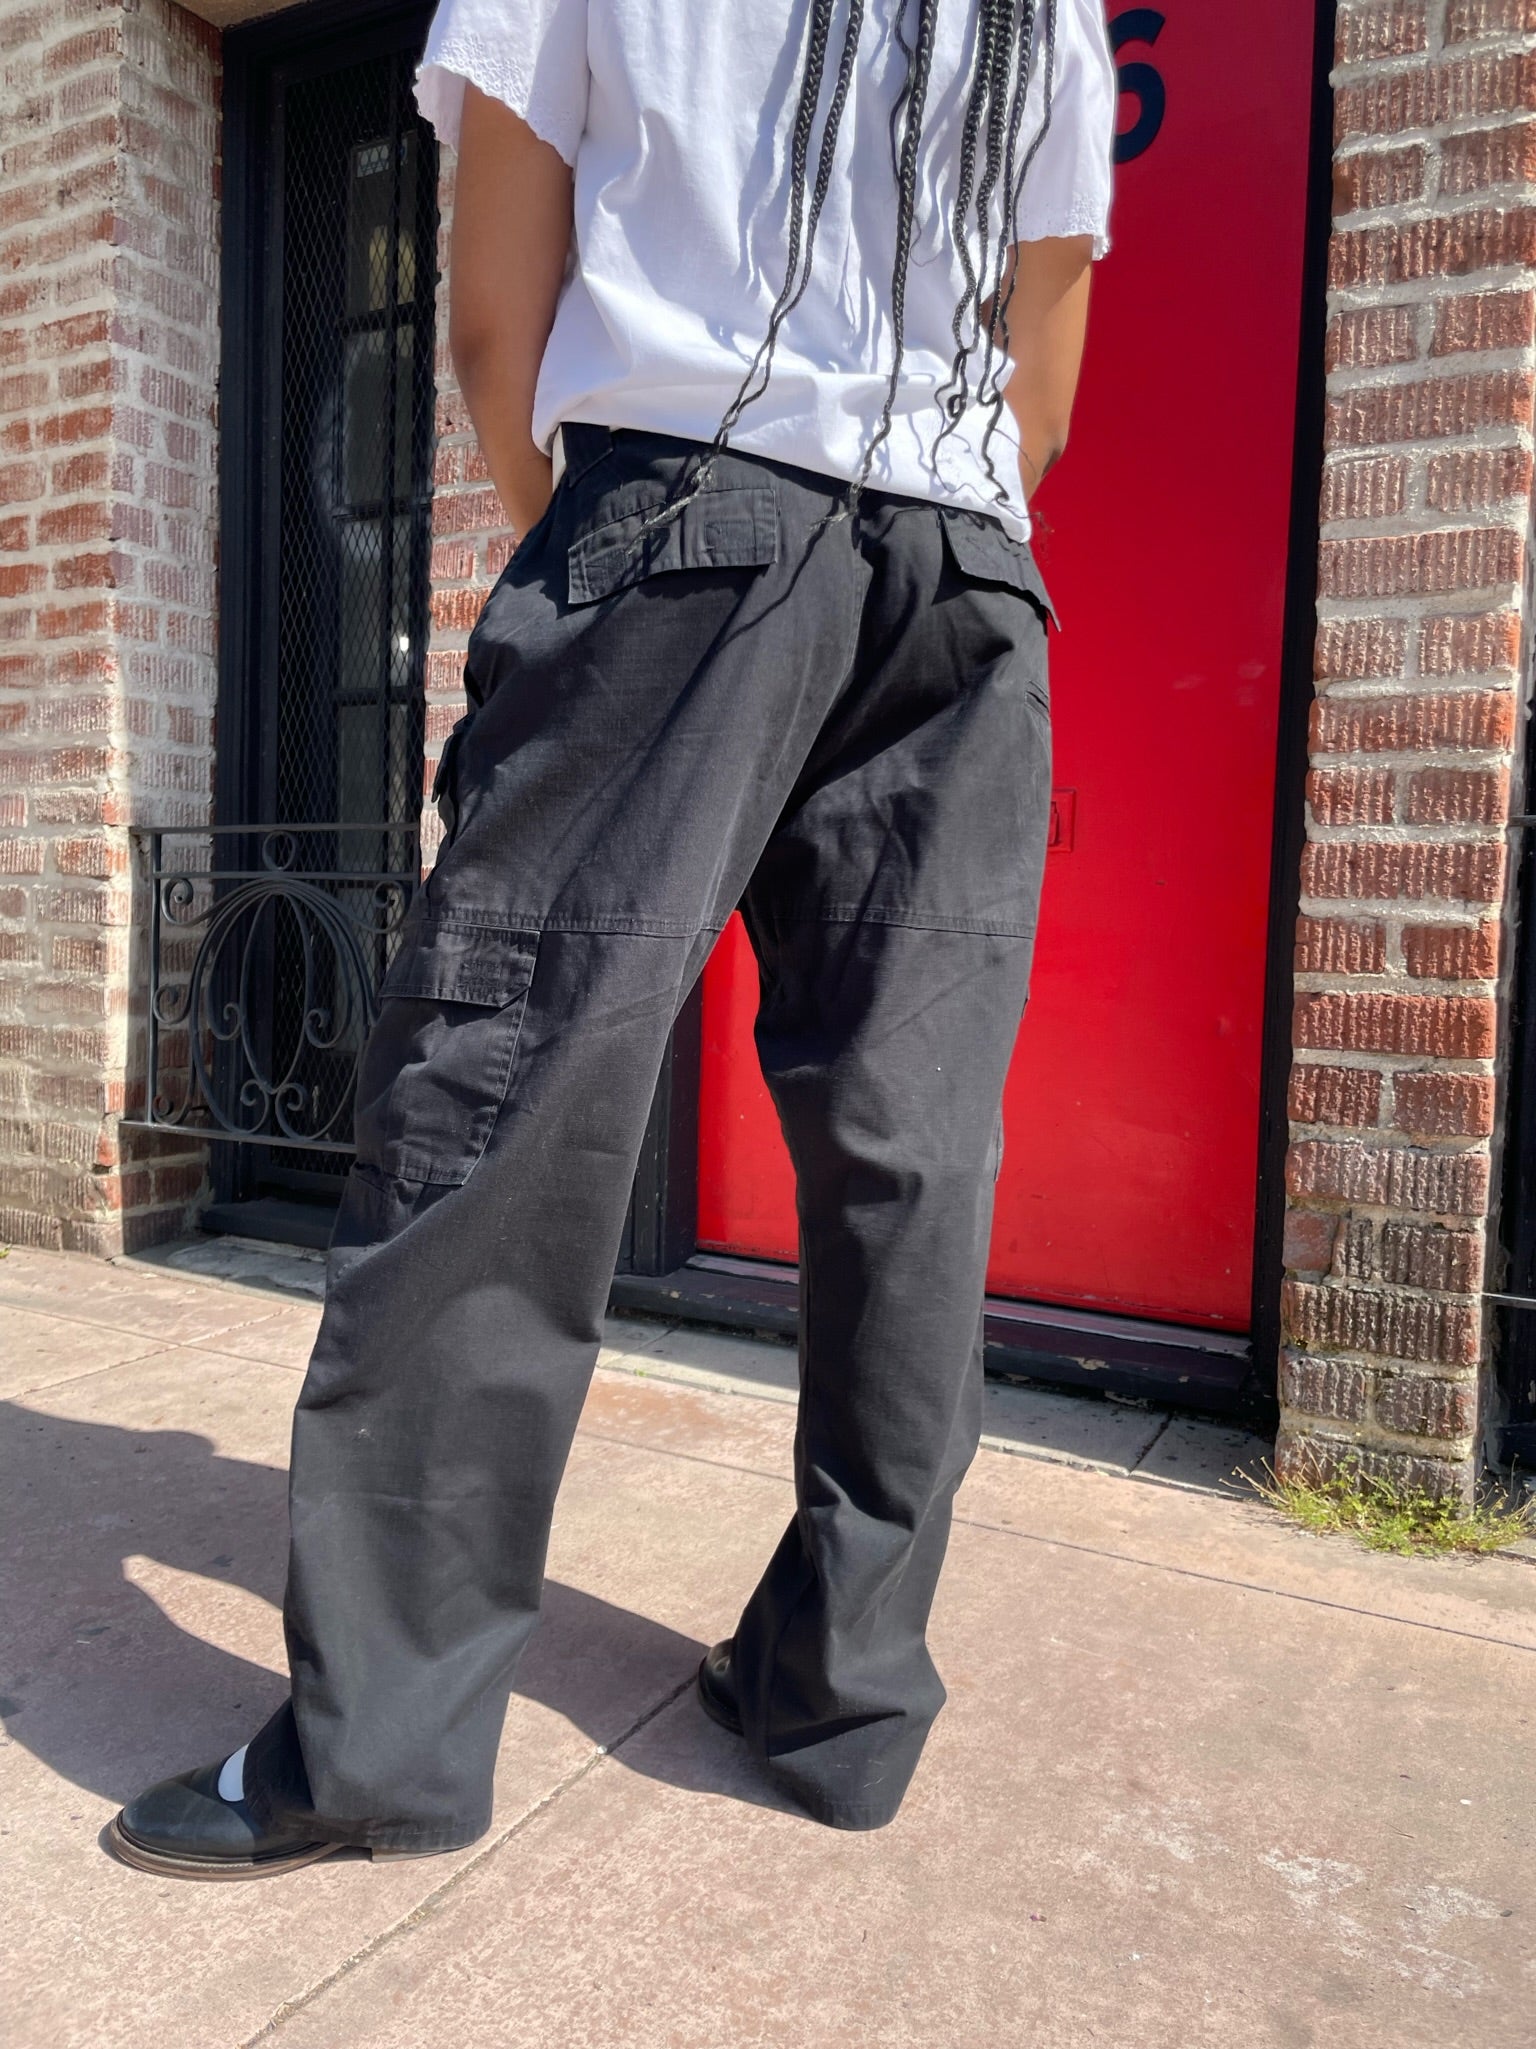 KNG Black Cargo Style Chef Pant : : Clothing, Shoes & Accessories